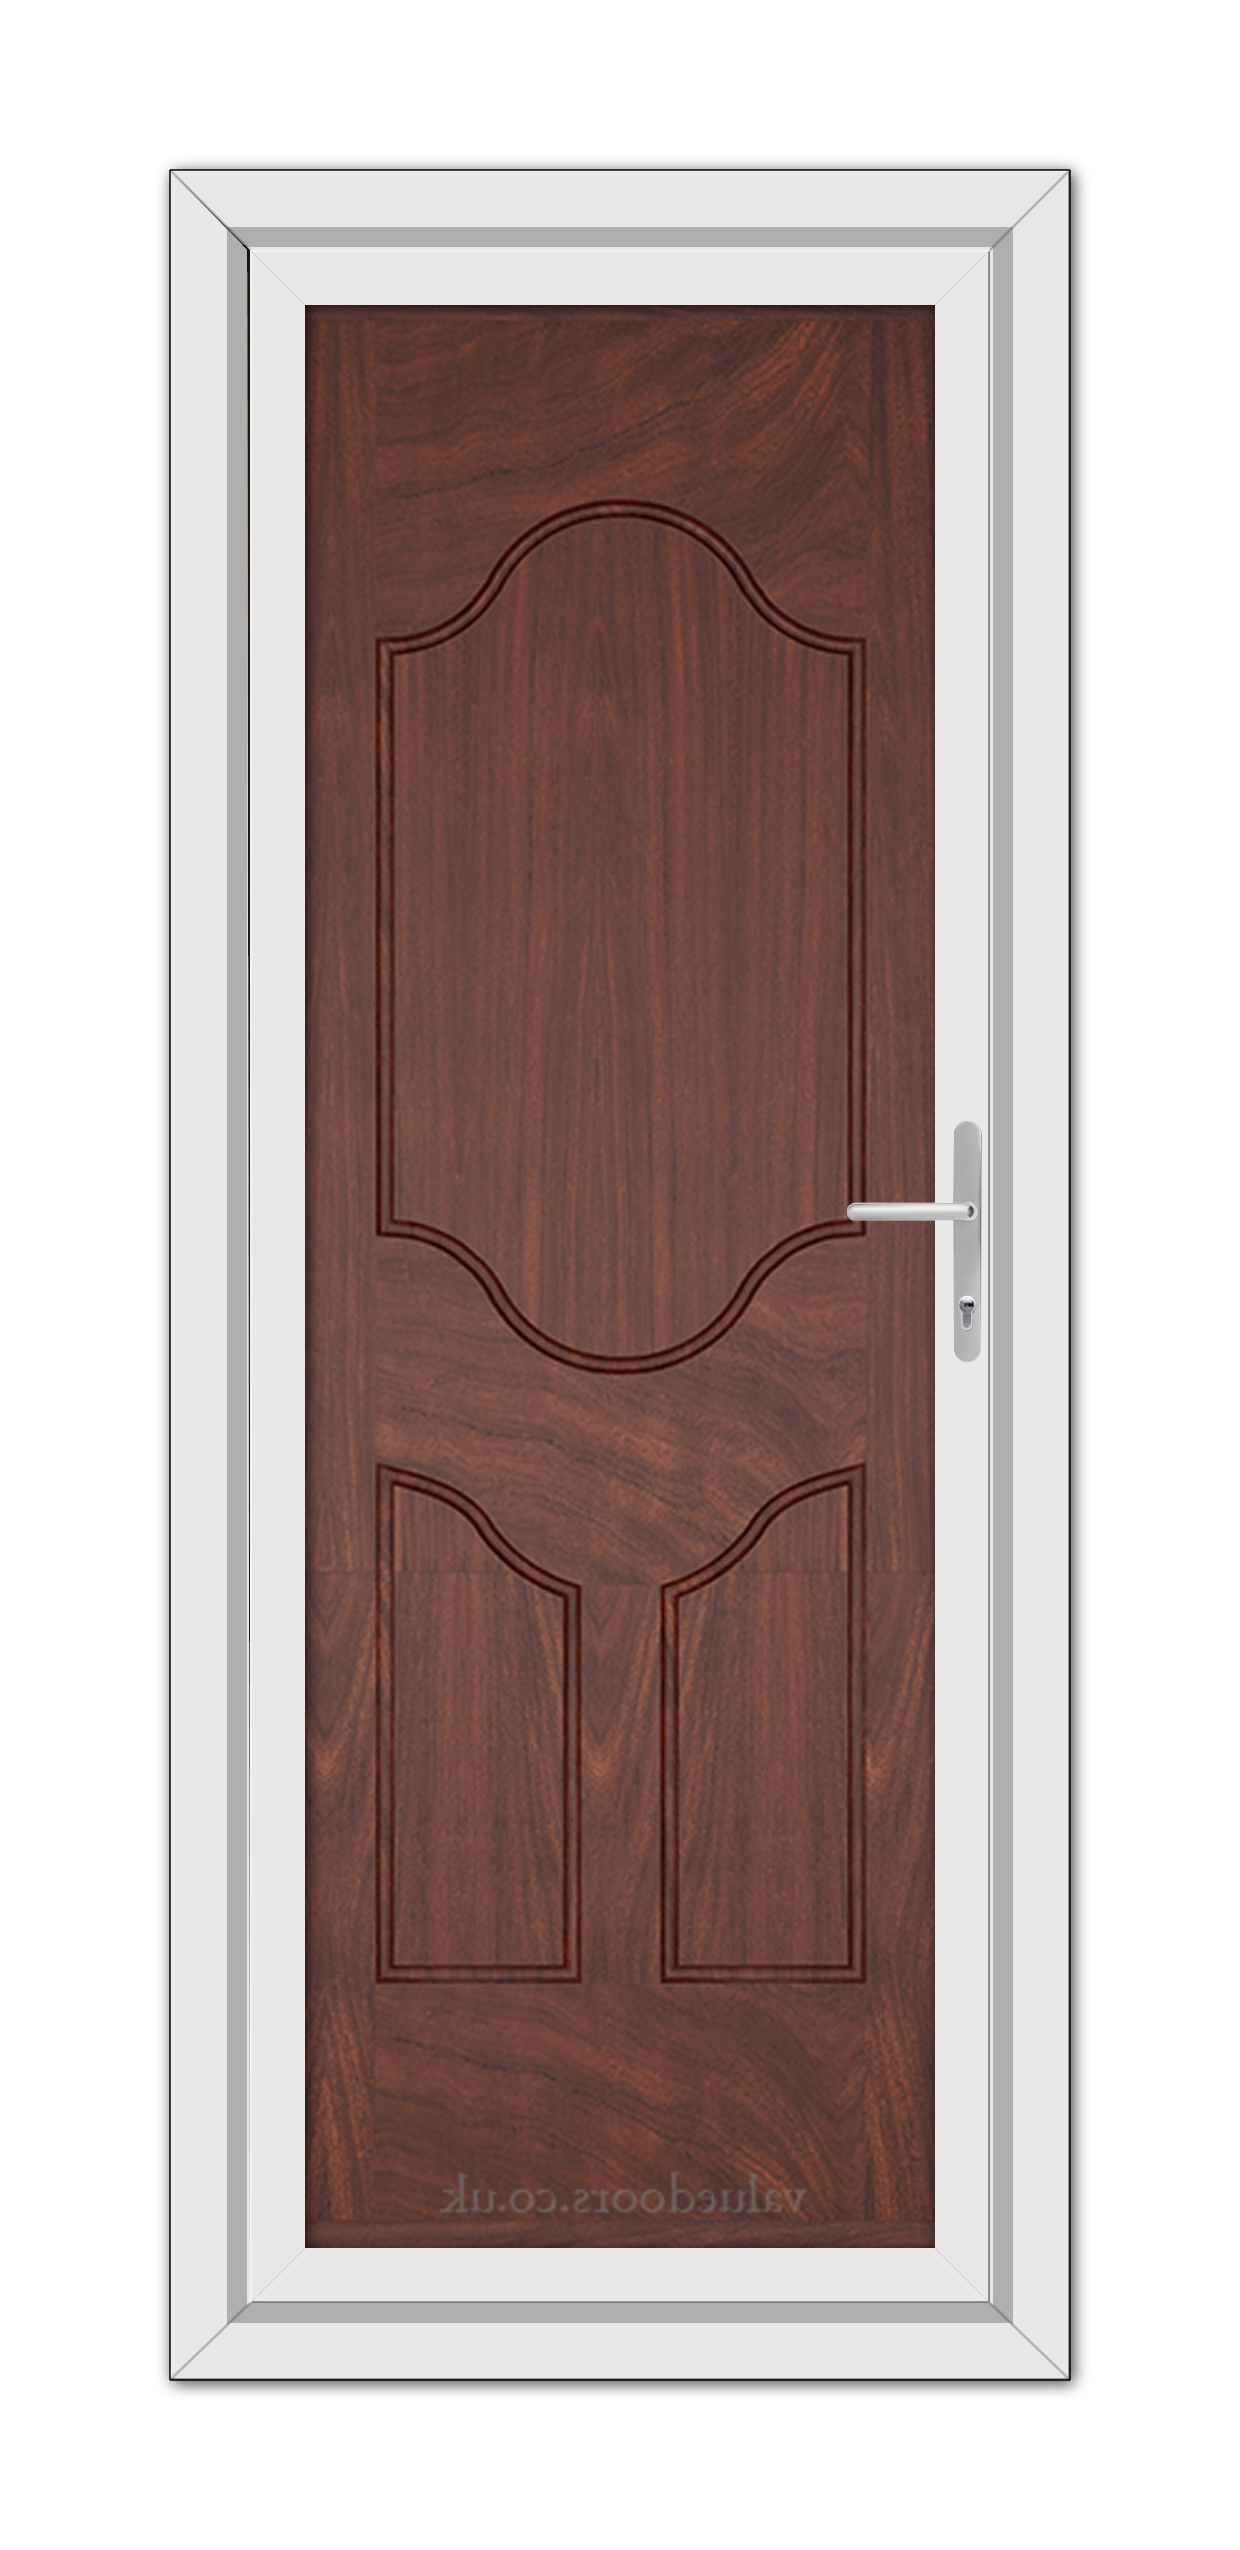 A close-up of a Rosewood Althorpe Solid uPVC Door.